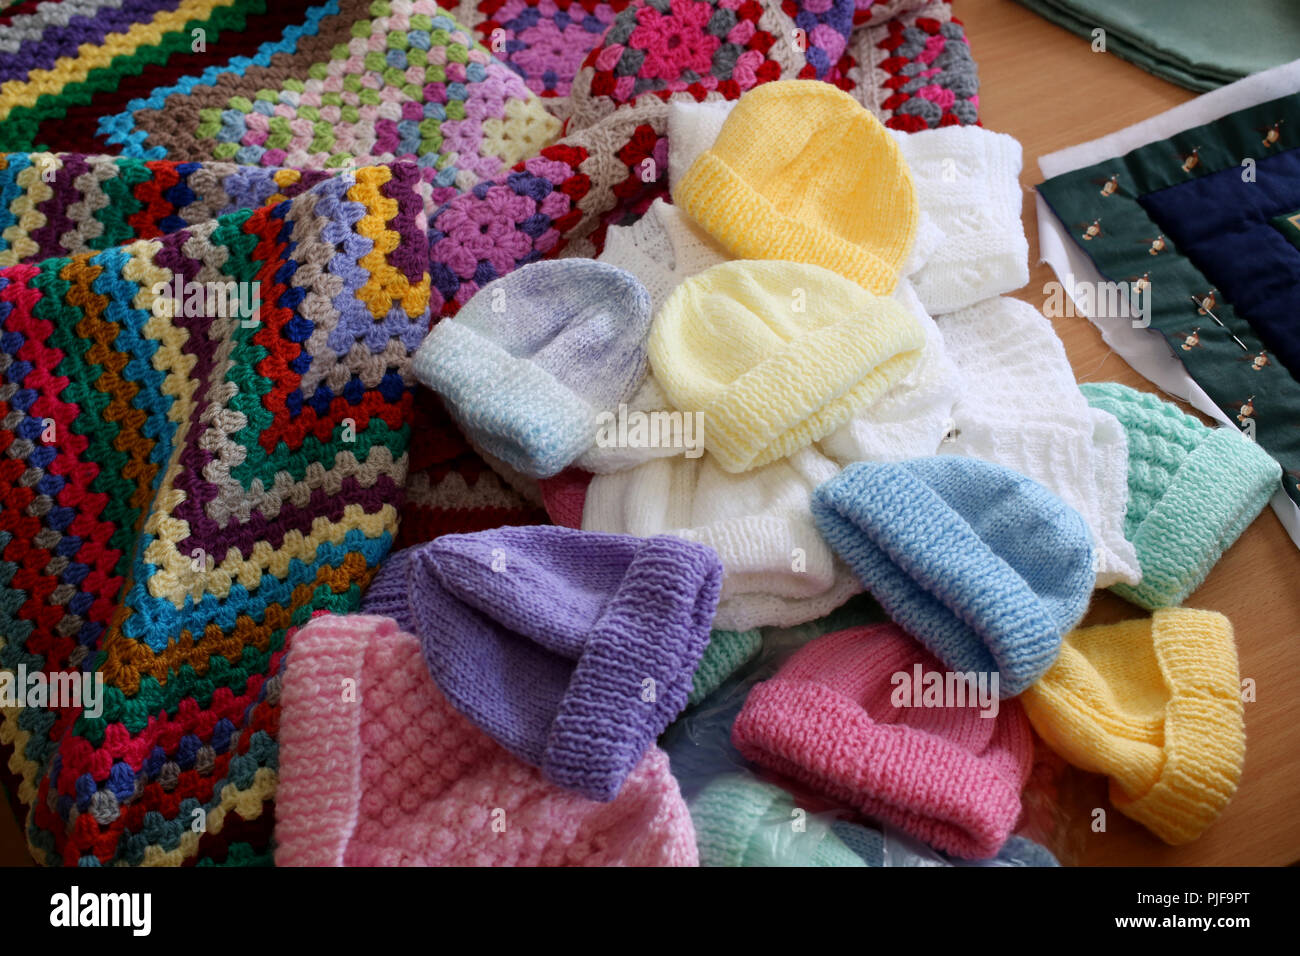 General views of Knitted babies hats, clothing and blankets in an old peoples home in Bognor Regis, West Sussex, UK. Stock Photo